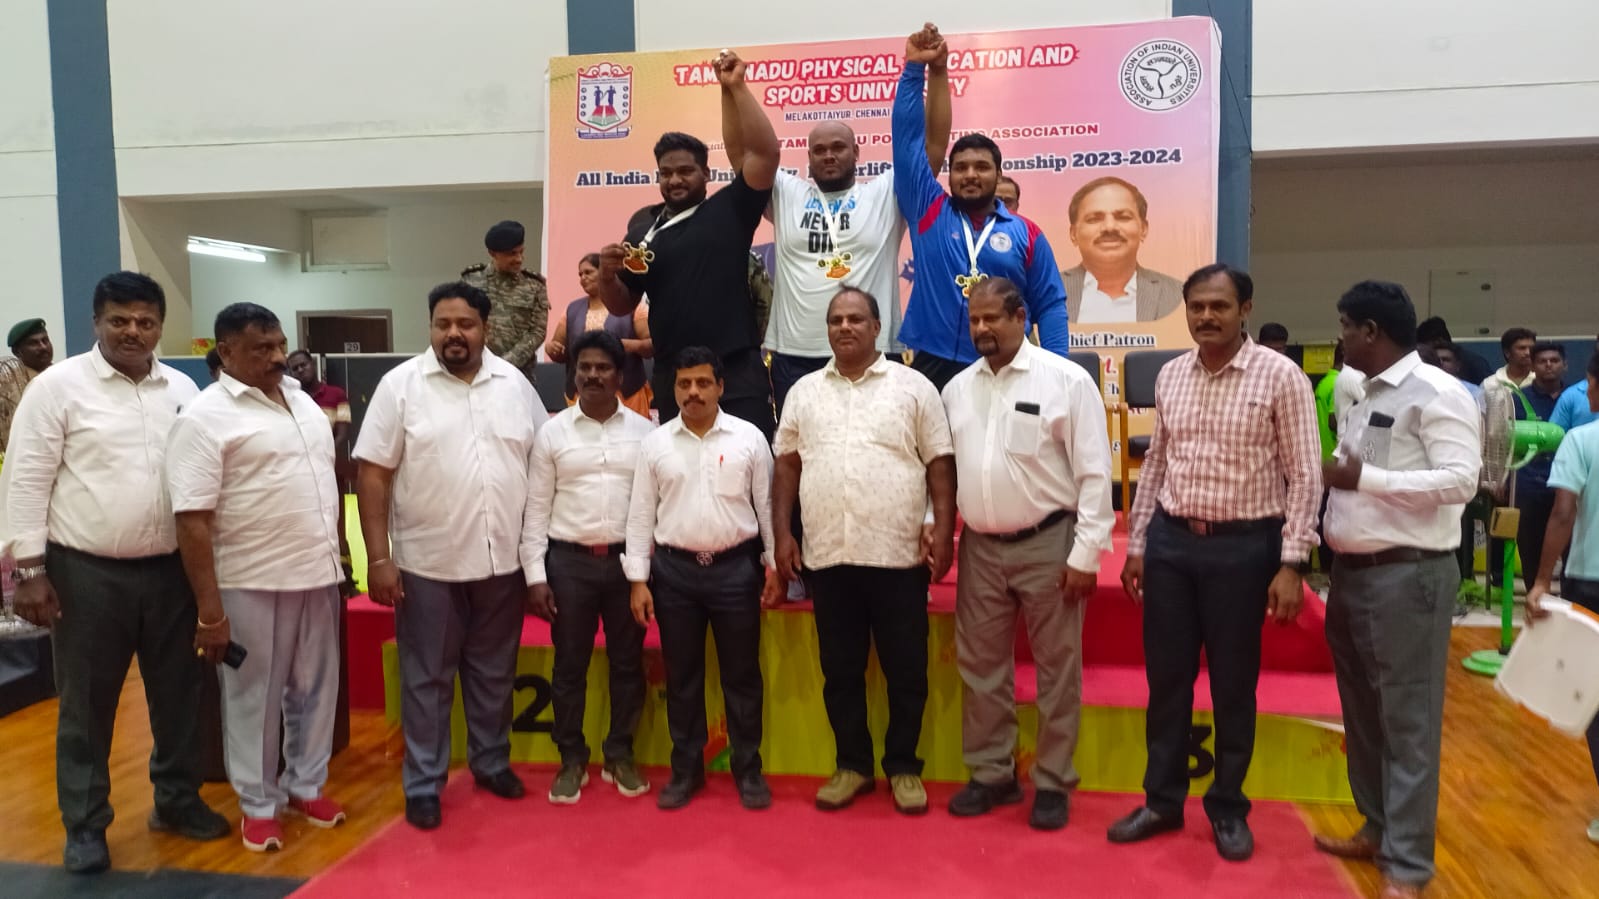 Student Manish Kumar won silver medal in 120 kg weight category.